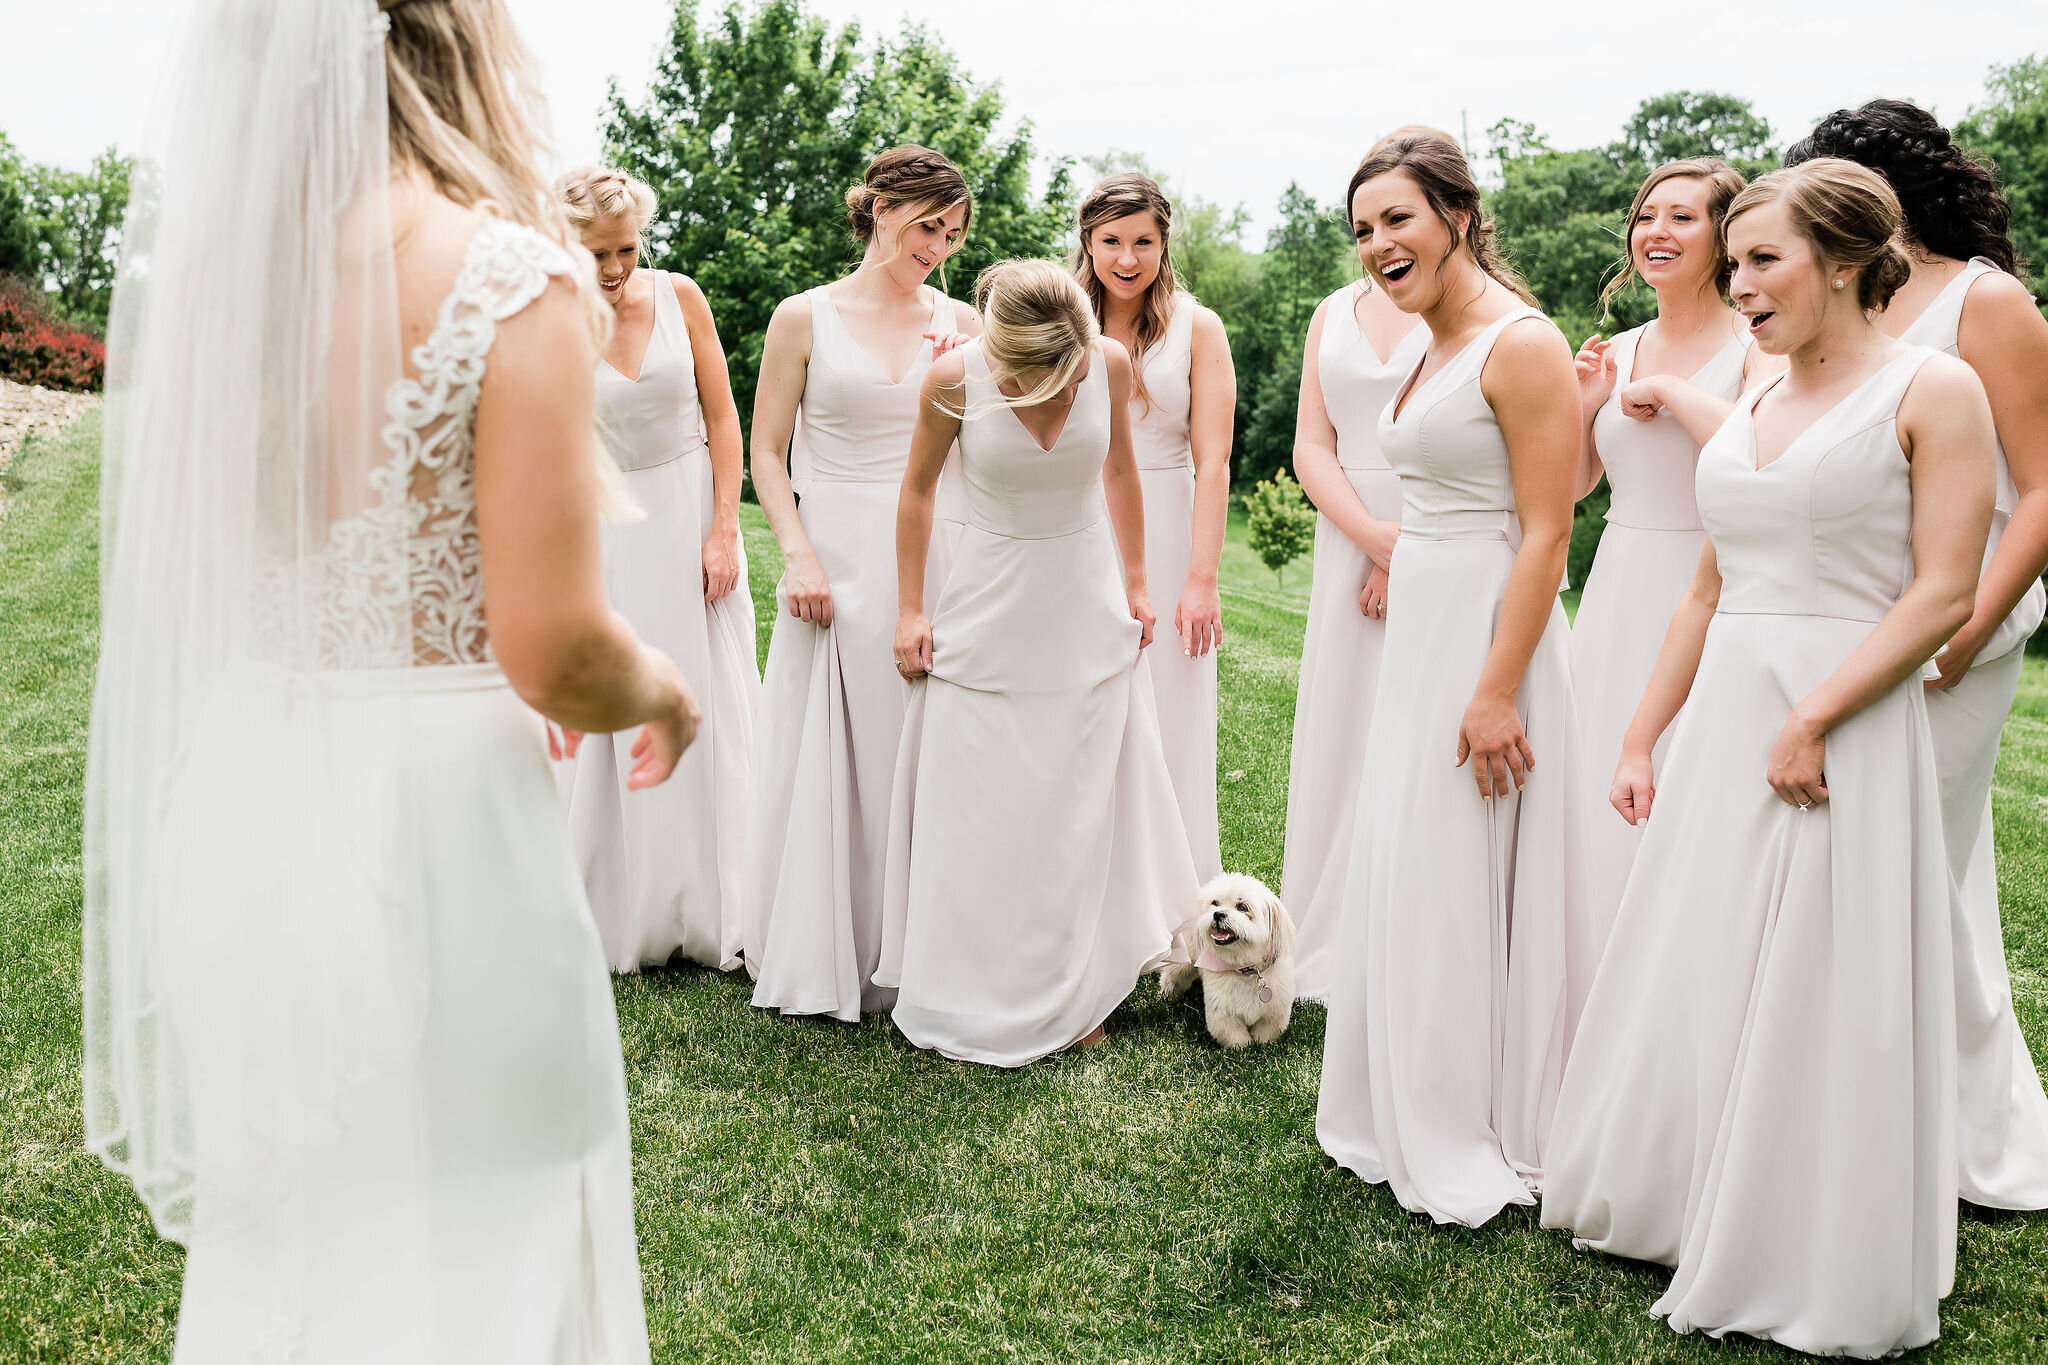 Family dog and bridesmaids react to seeing bride for the first time on her wedding day